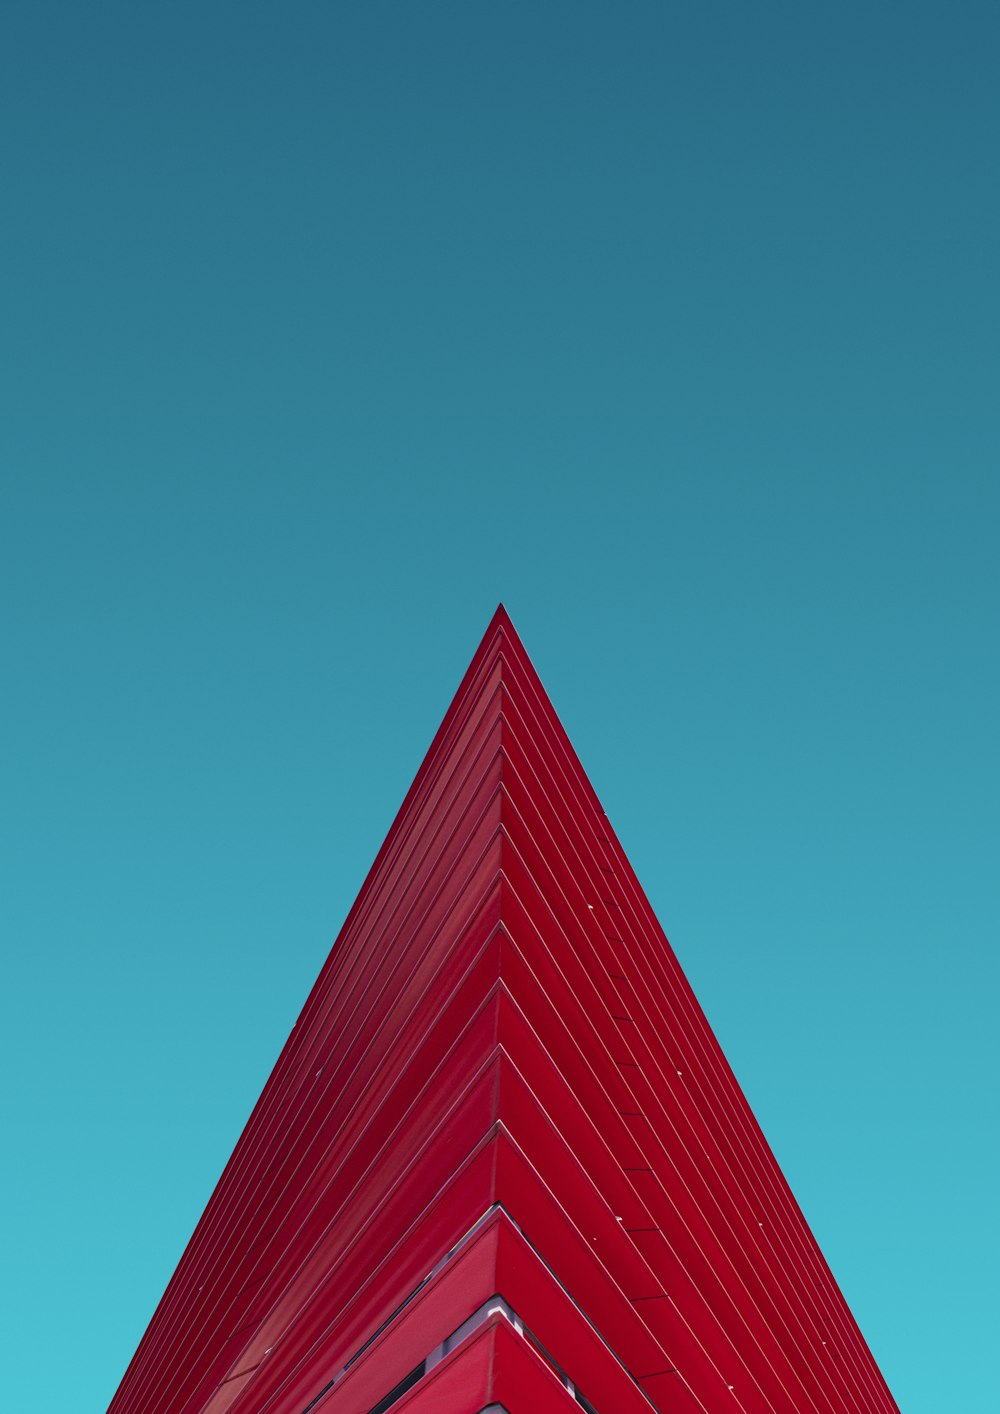 a red triangular shaped building against a blue sky